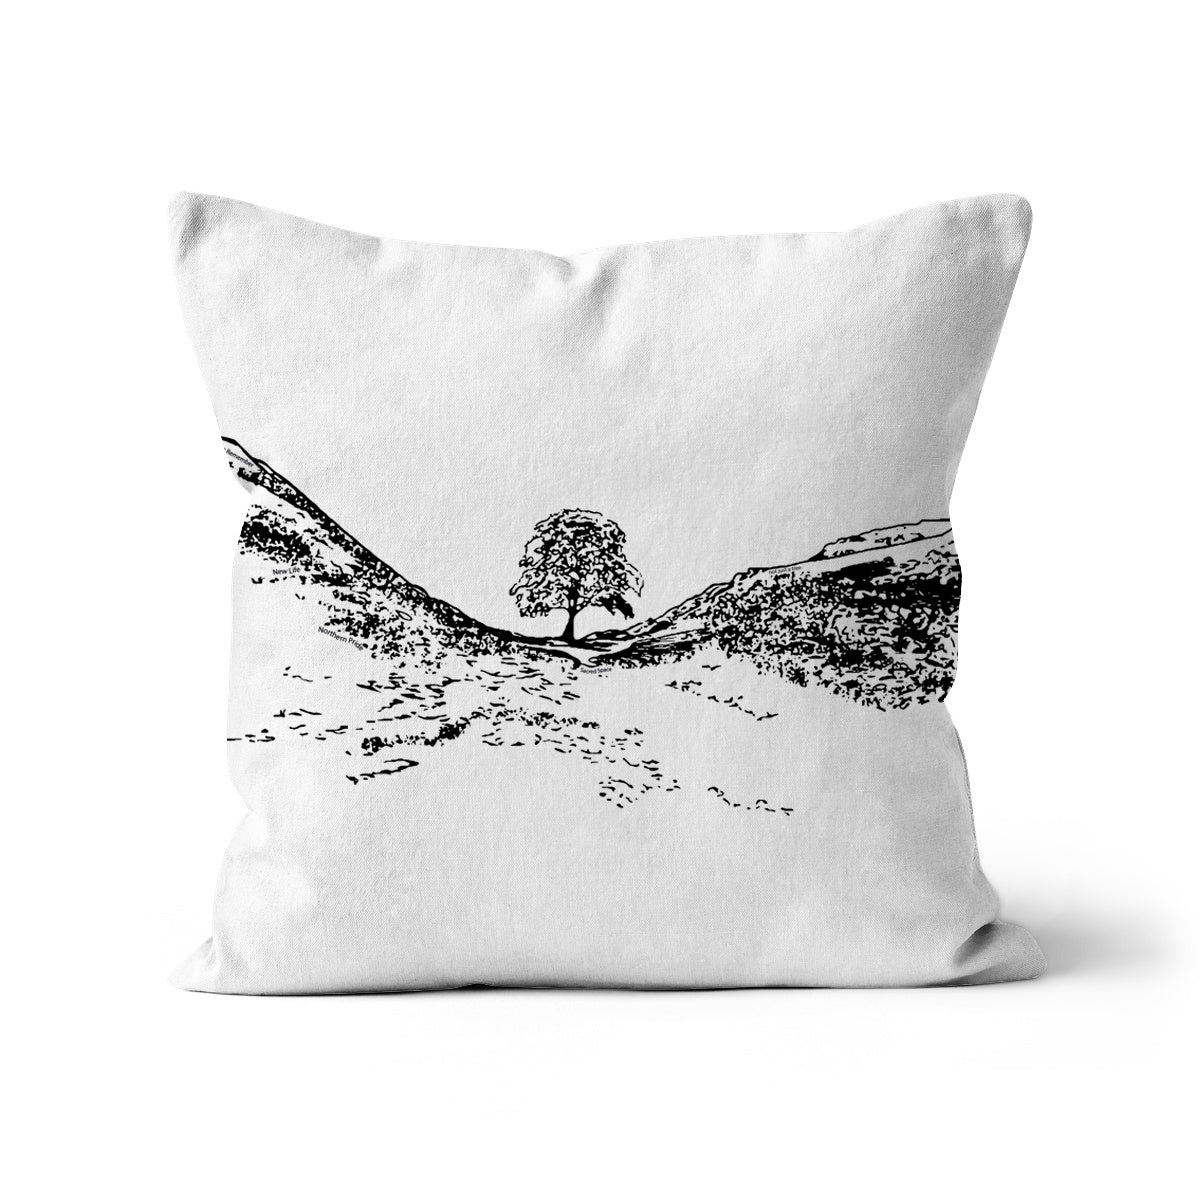 Sycamore Gap themed cushion with cover featuring Sycamore Gap print by Powder Butterfly